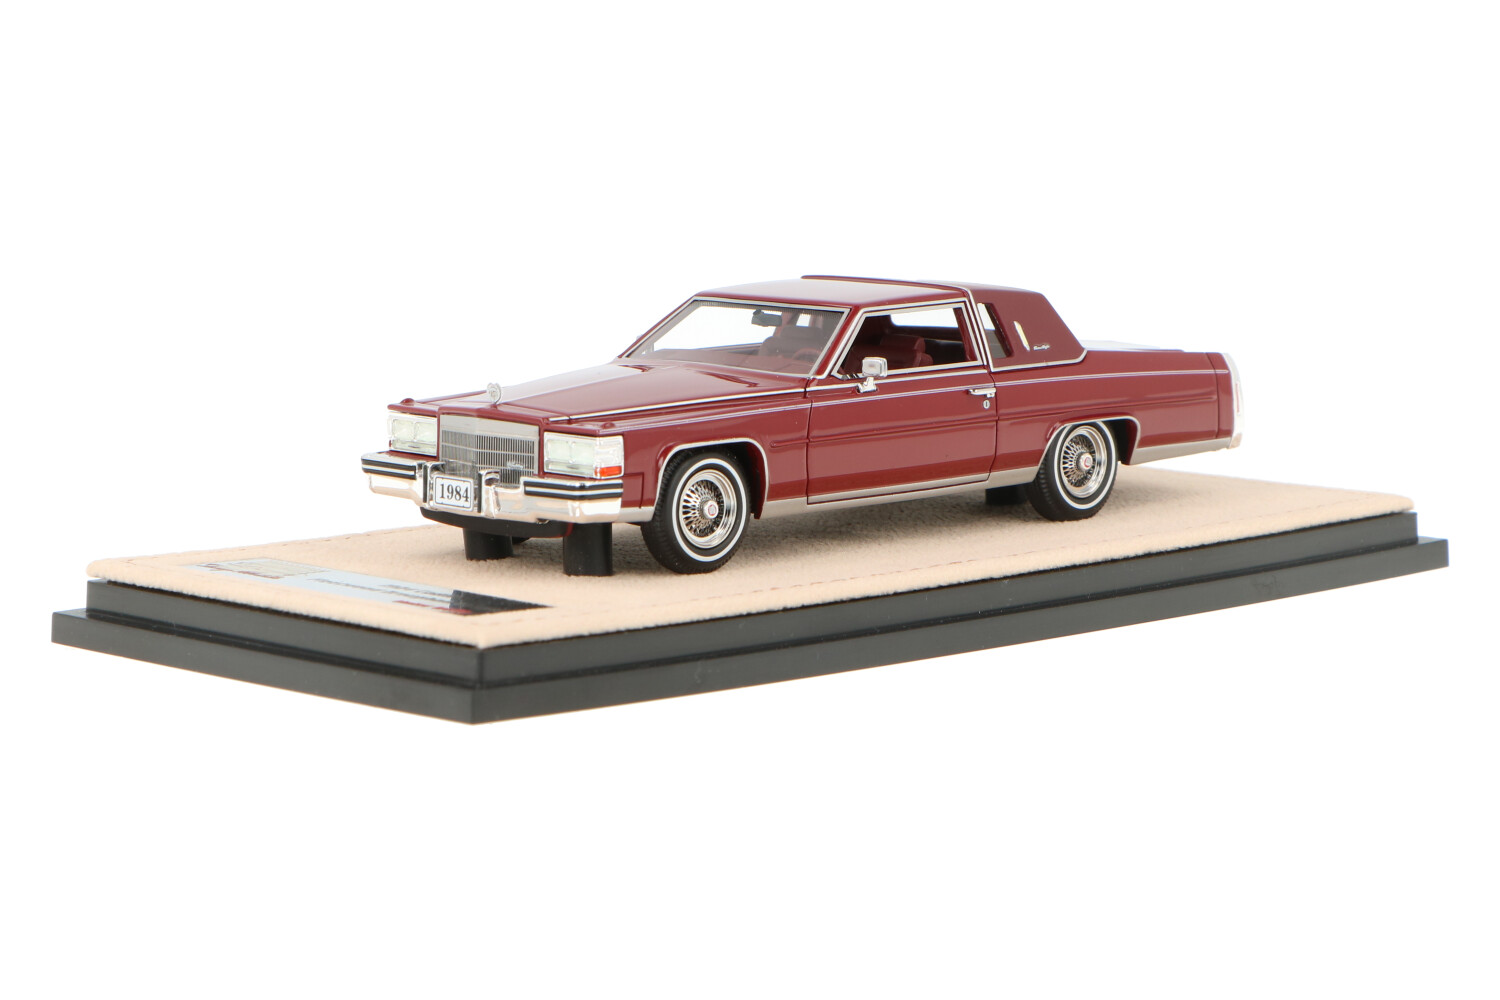 Cadillac-Fleetwood-Brougham-Coupe-STM84801_1315STM84801Cadillac-Fleetwood-Brougham-Coupe-STM84801_Houseofmodelcars_.jpg